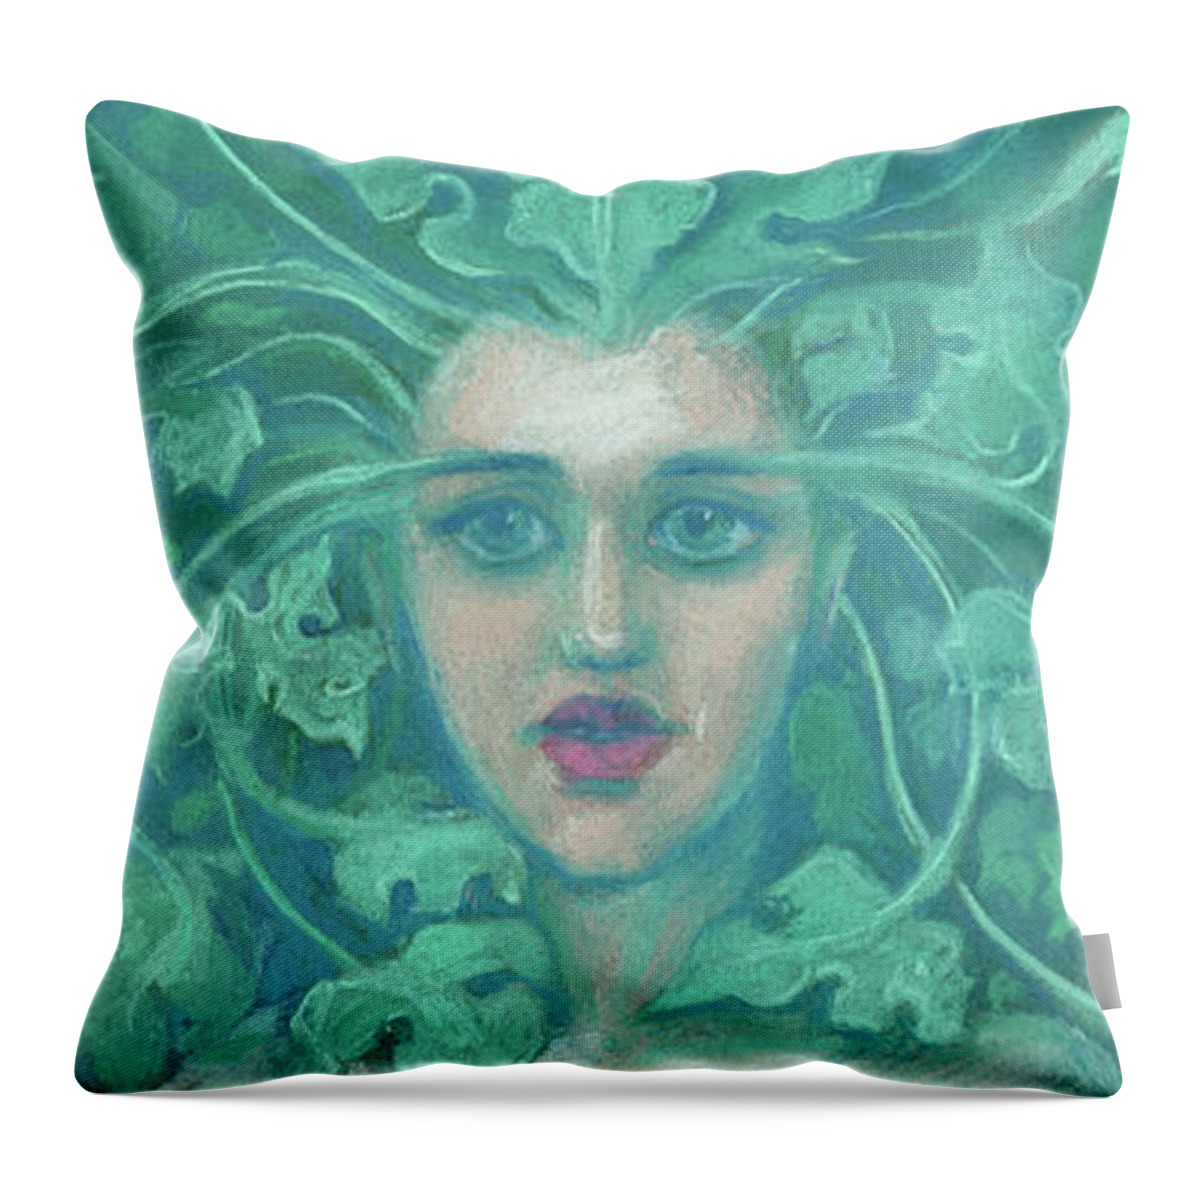 Celtic Throw Pillow featuring the painting Green Lady / Forest Queen by Julia Khoroshikh